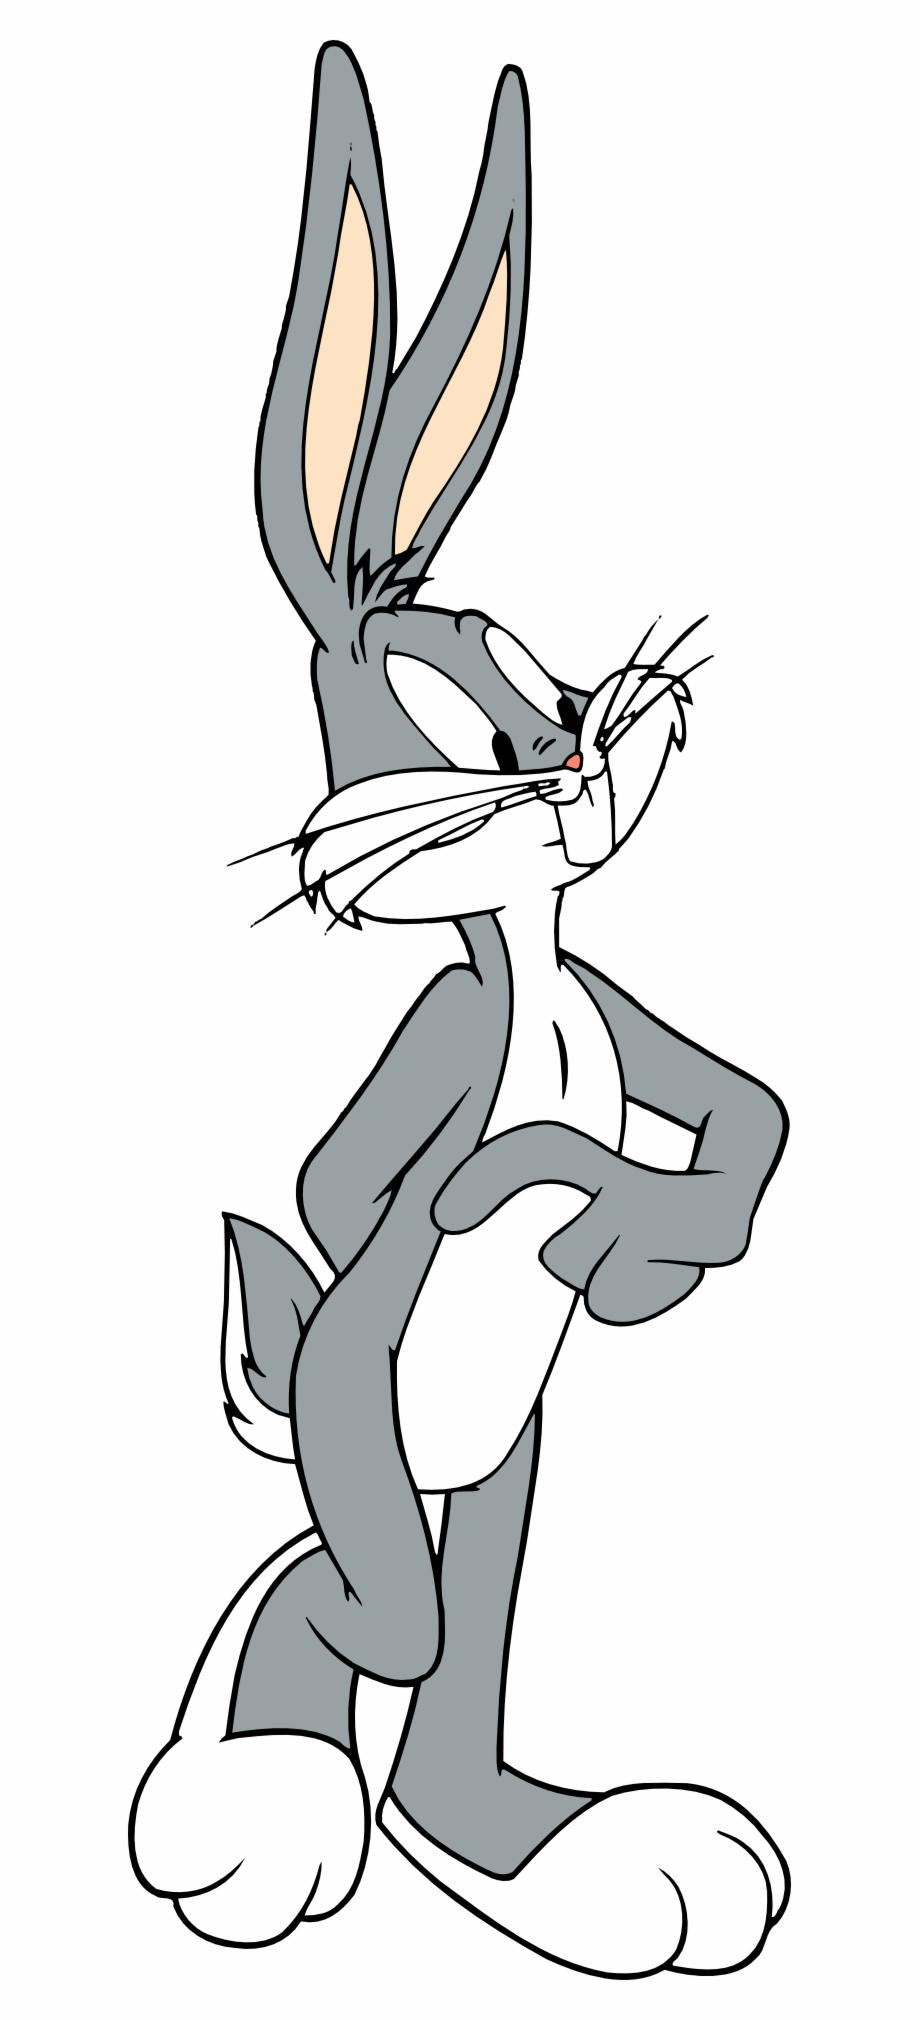 Clip Arts Related To : Bugs Bunny Rabbit Clip art - rabbit png download -.....